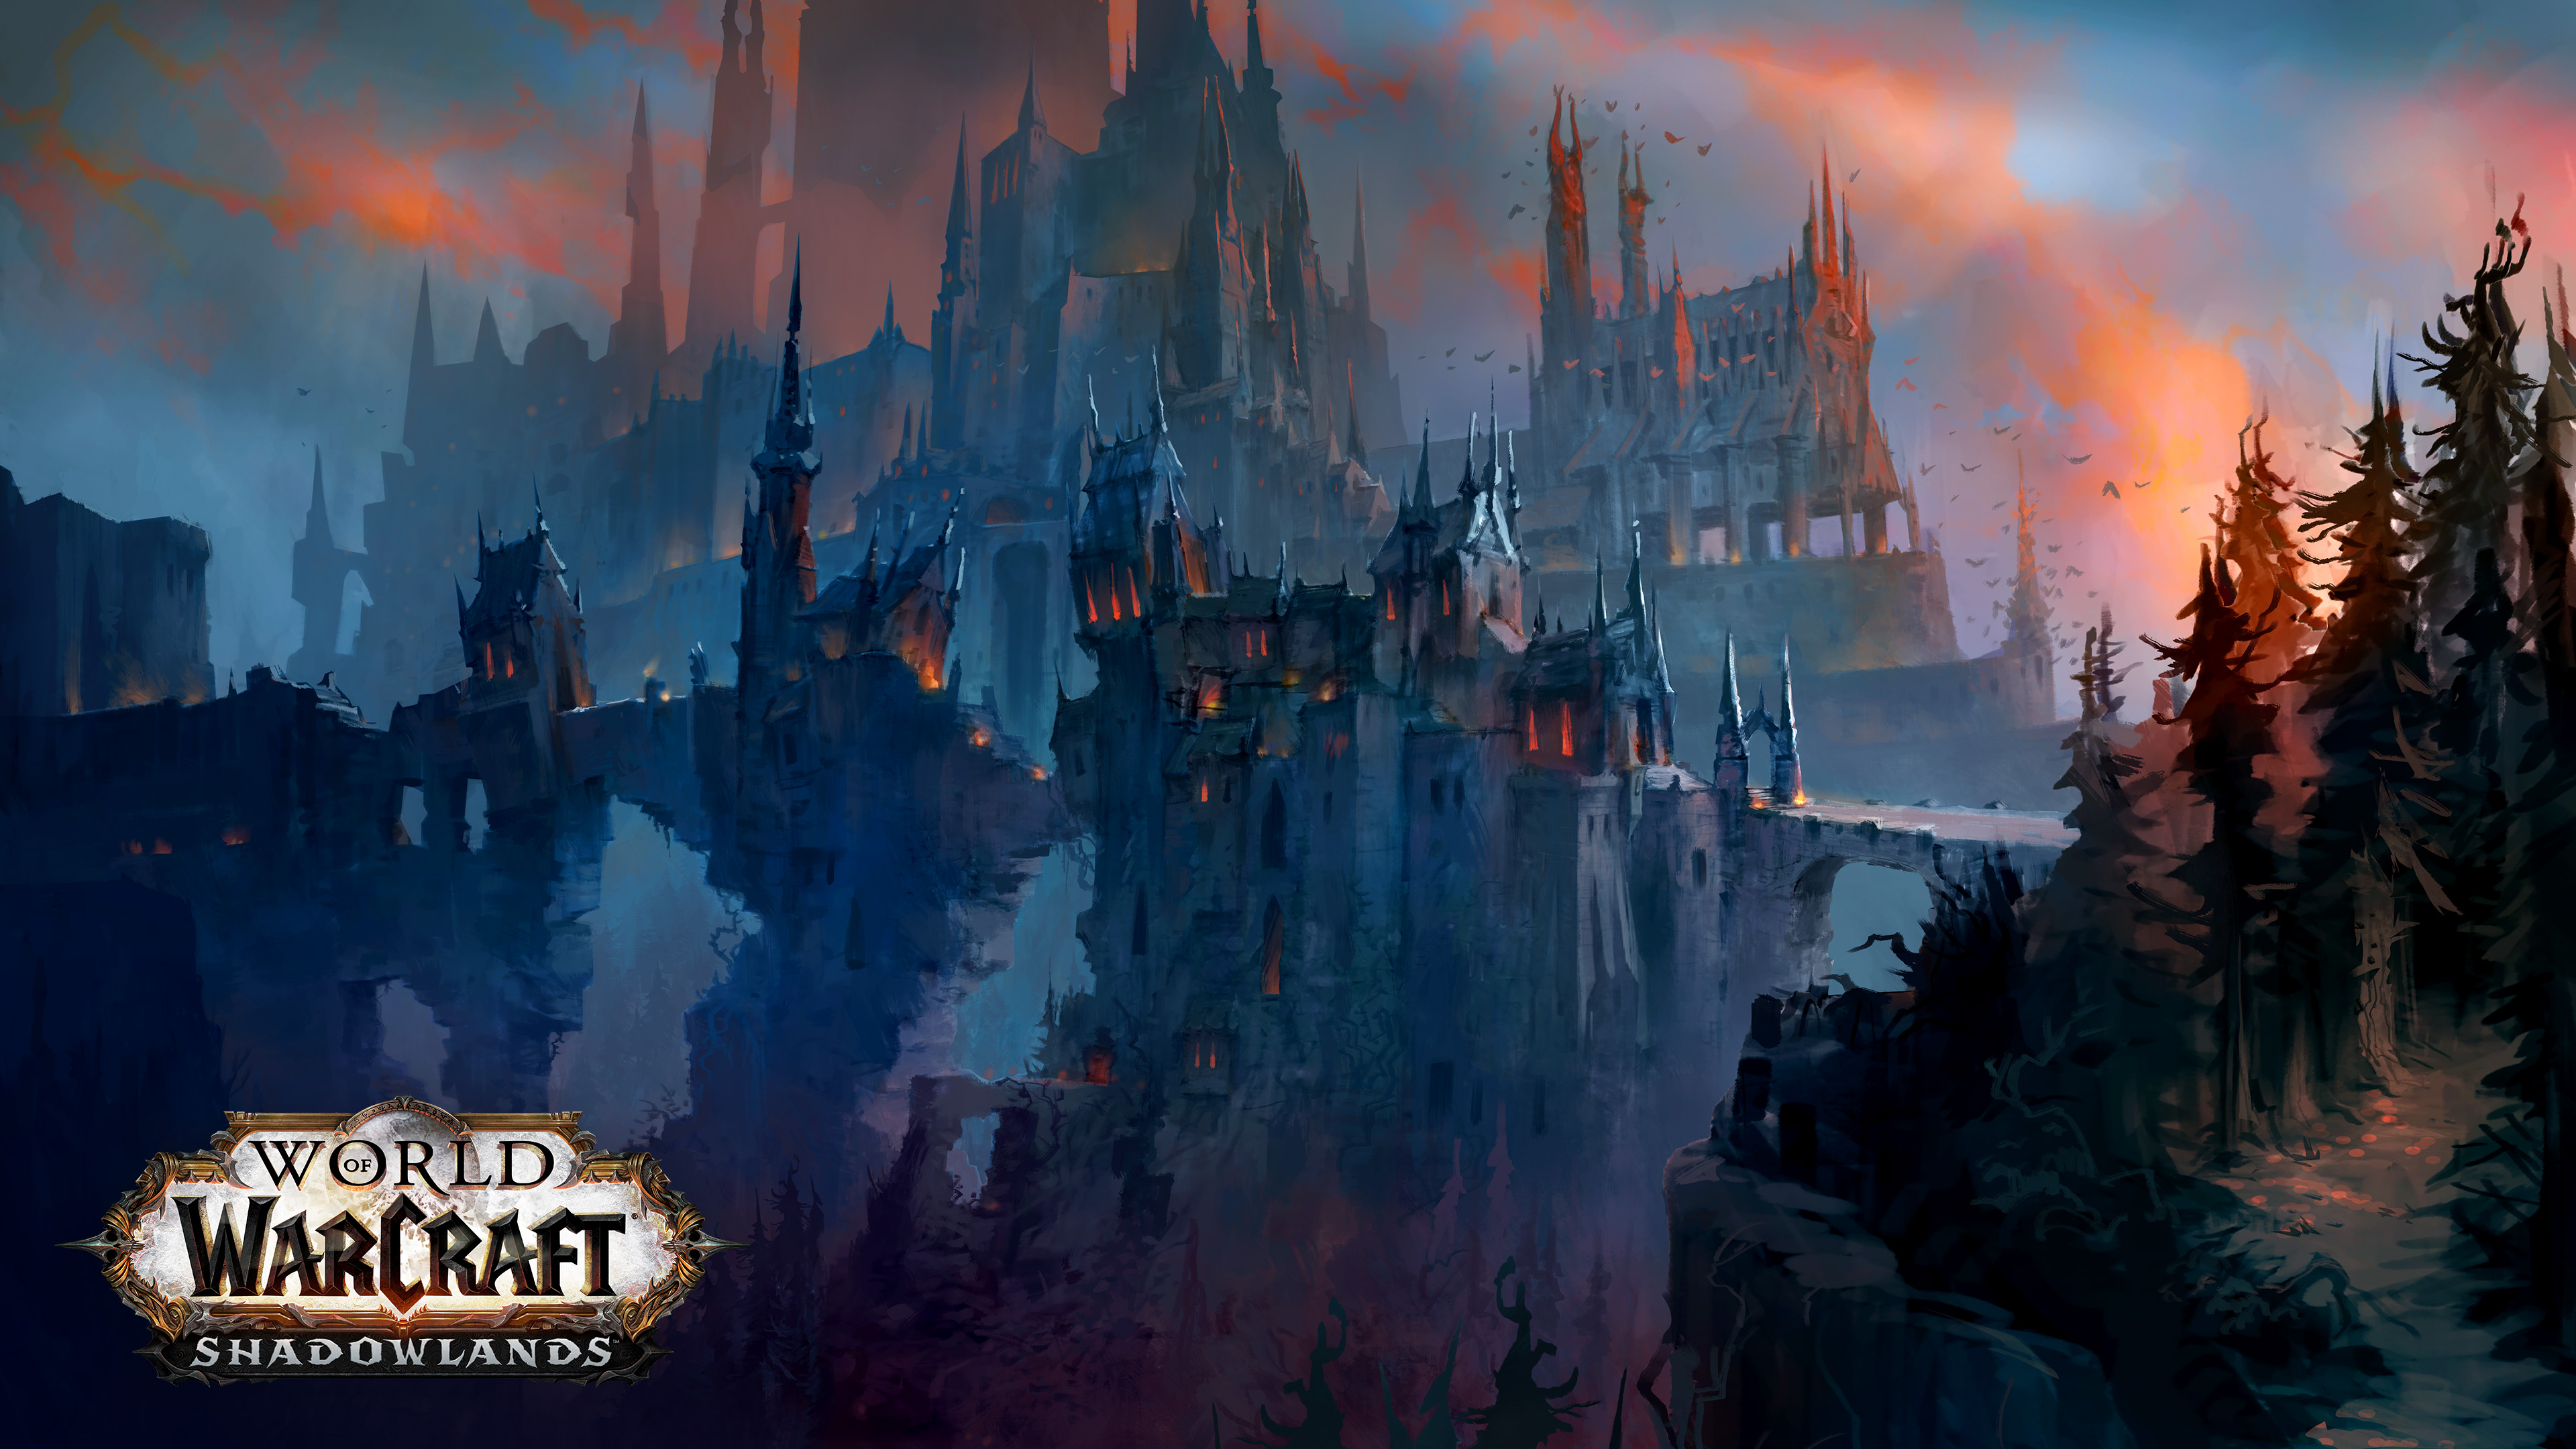 Video Game World of Warcraft: Shadowlands HD Wallpaper | Background Image